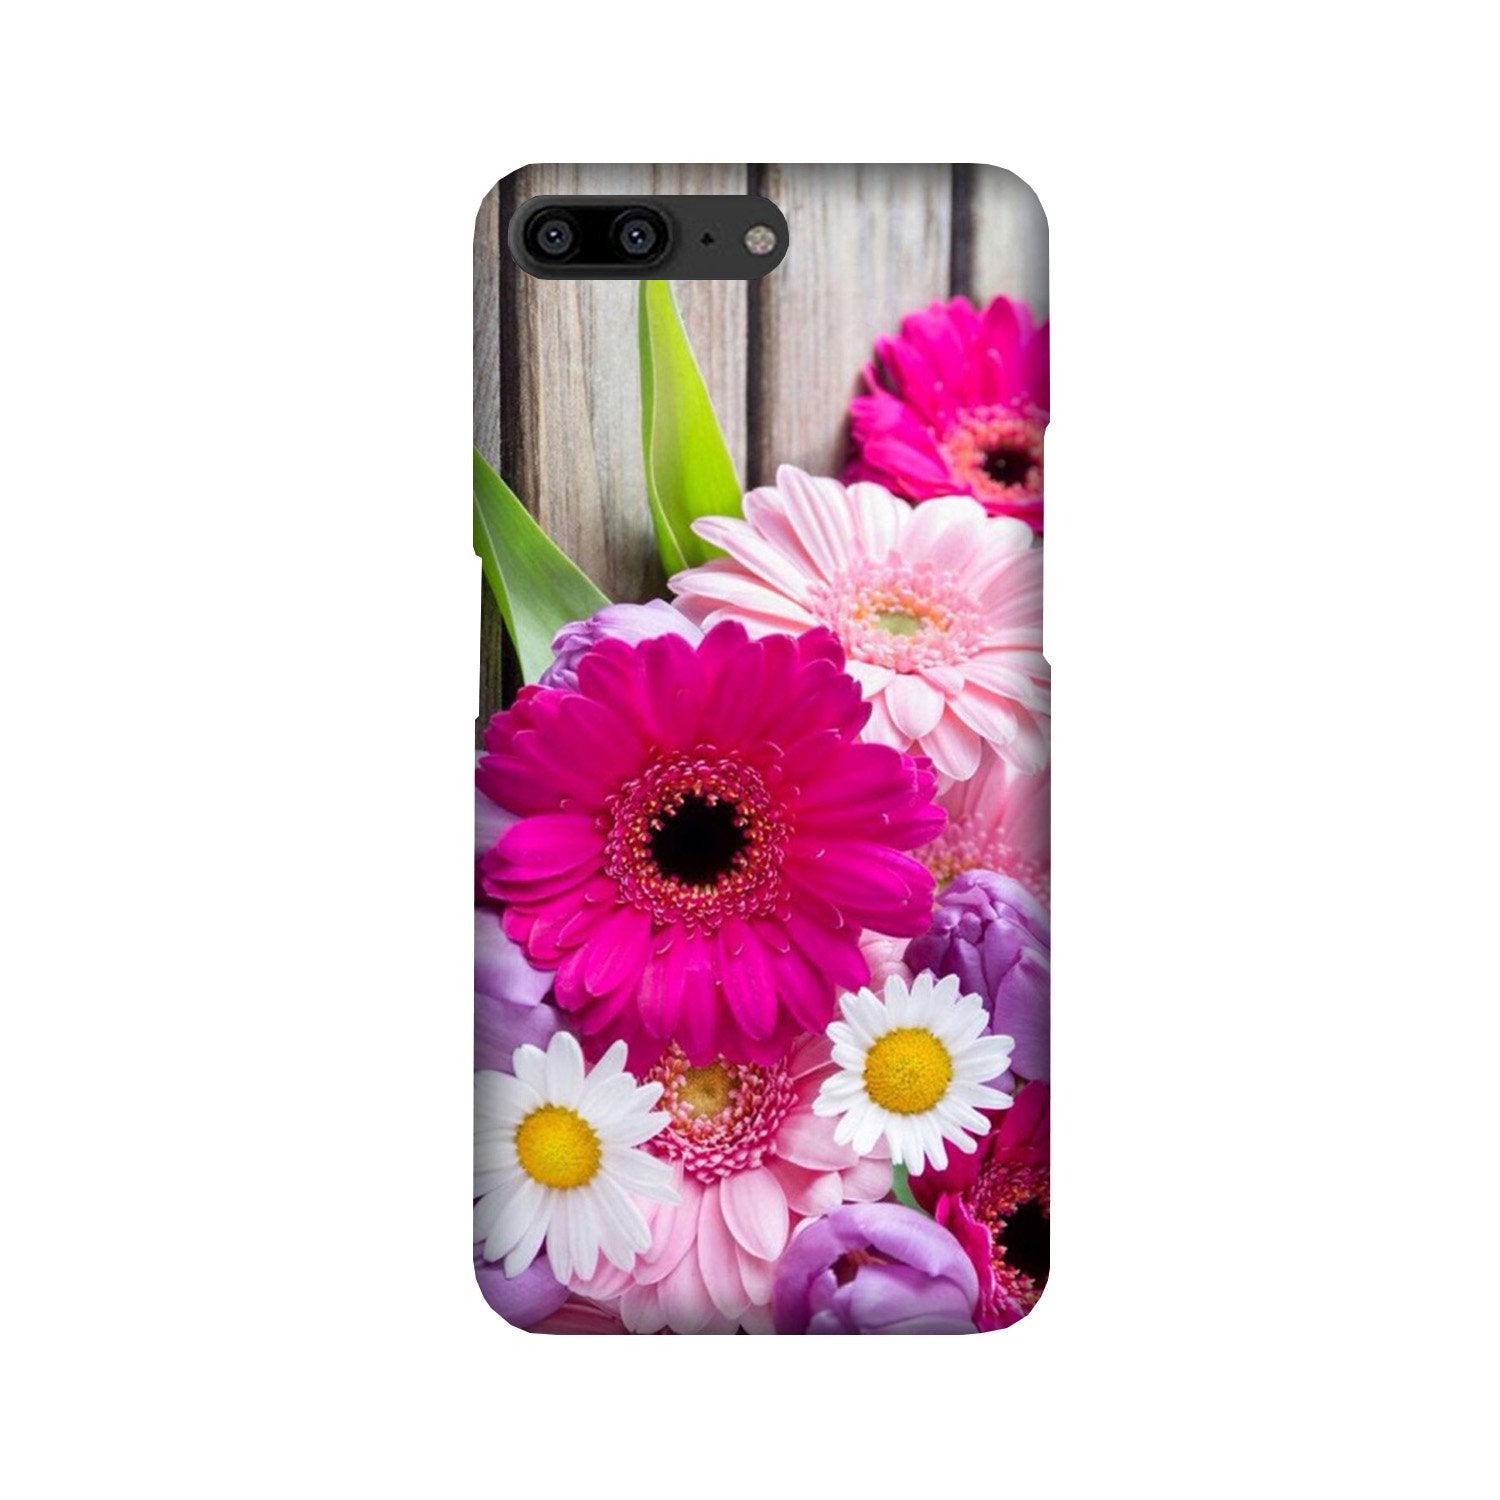 Coloful Daisy2 Case for OnePlus 5